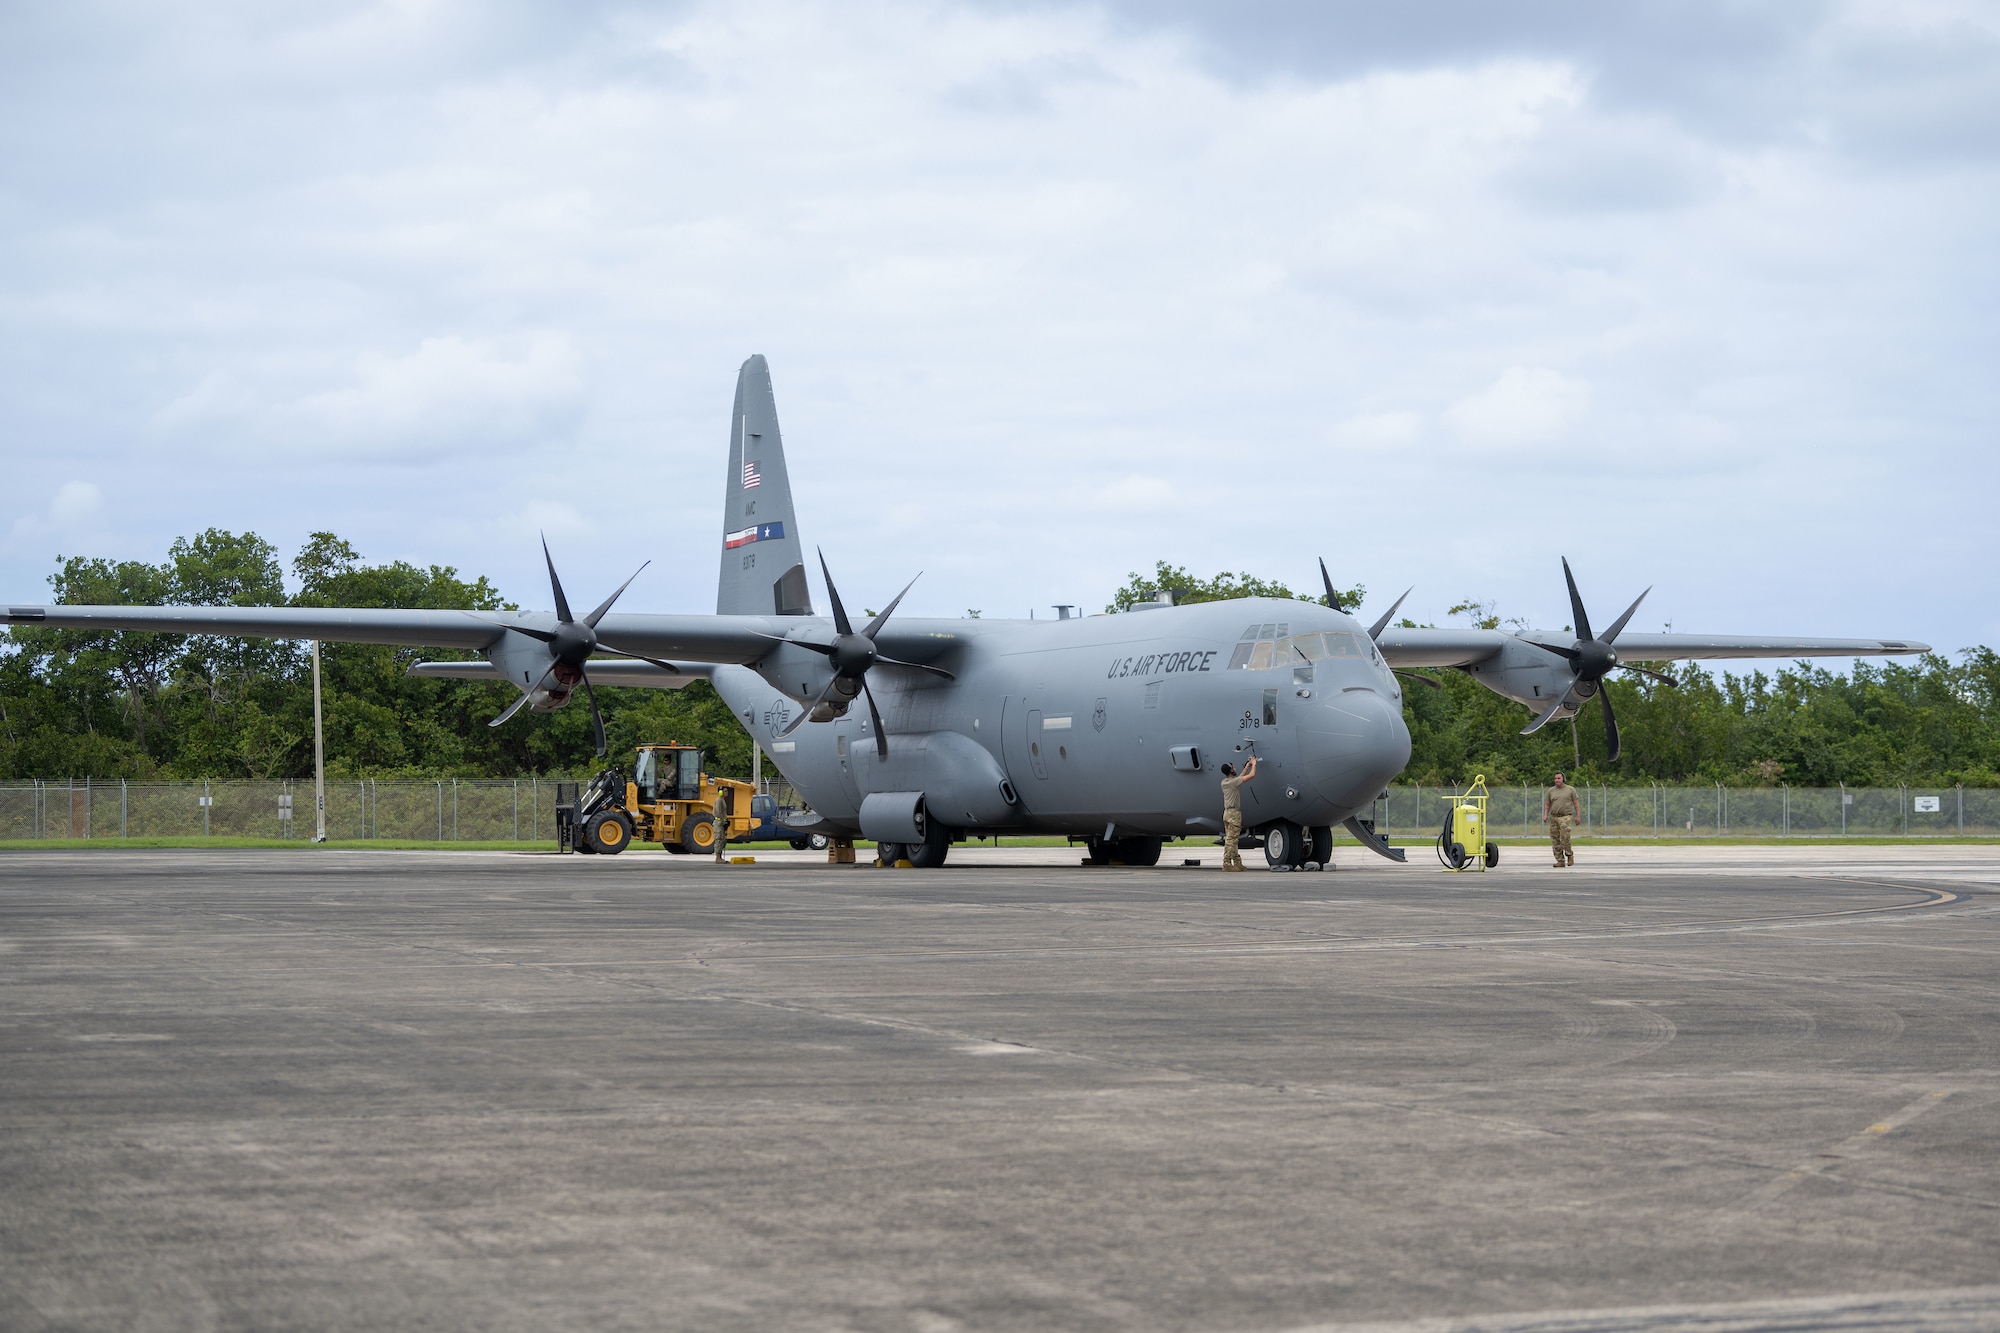 U.S. Airmen perform cargo off loading procedures on a C-130J Super Hercules assigned to the 317th Airlift Wing, Dyess Air Force Base, during Operation Forward Tiger exercise at Muniz Air National Guard Base, Carolina, Puerto Rico, Feb. 21, 2023. The Puerto Rico Air National Guard provided logistical support during this training exercise where  airmen will partner with Dominican Republic, Jamaica and Canadian Forces to enhance the humanitarian assistance and disaster relief mission throughout the Caribbean.  (U.S. Air National Guard photo by Airman 1st Class Gisselle Toro)